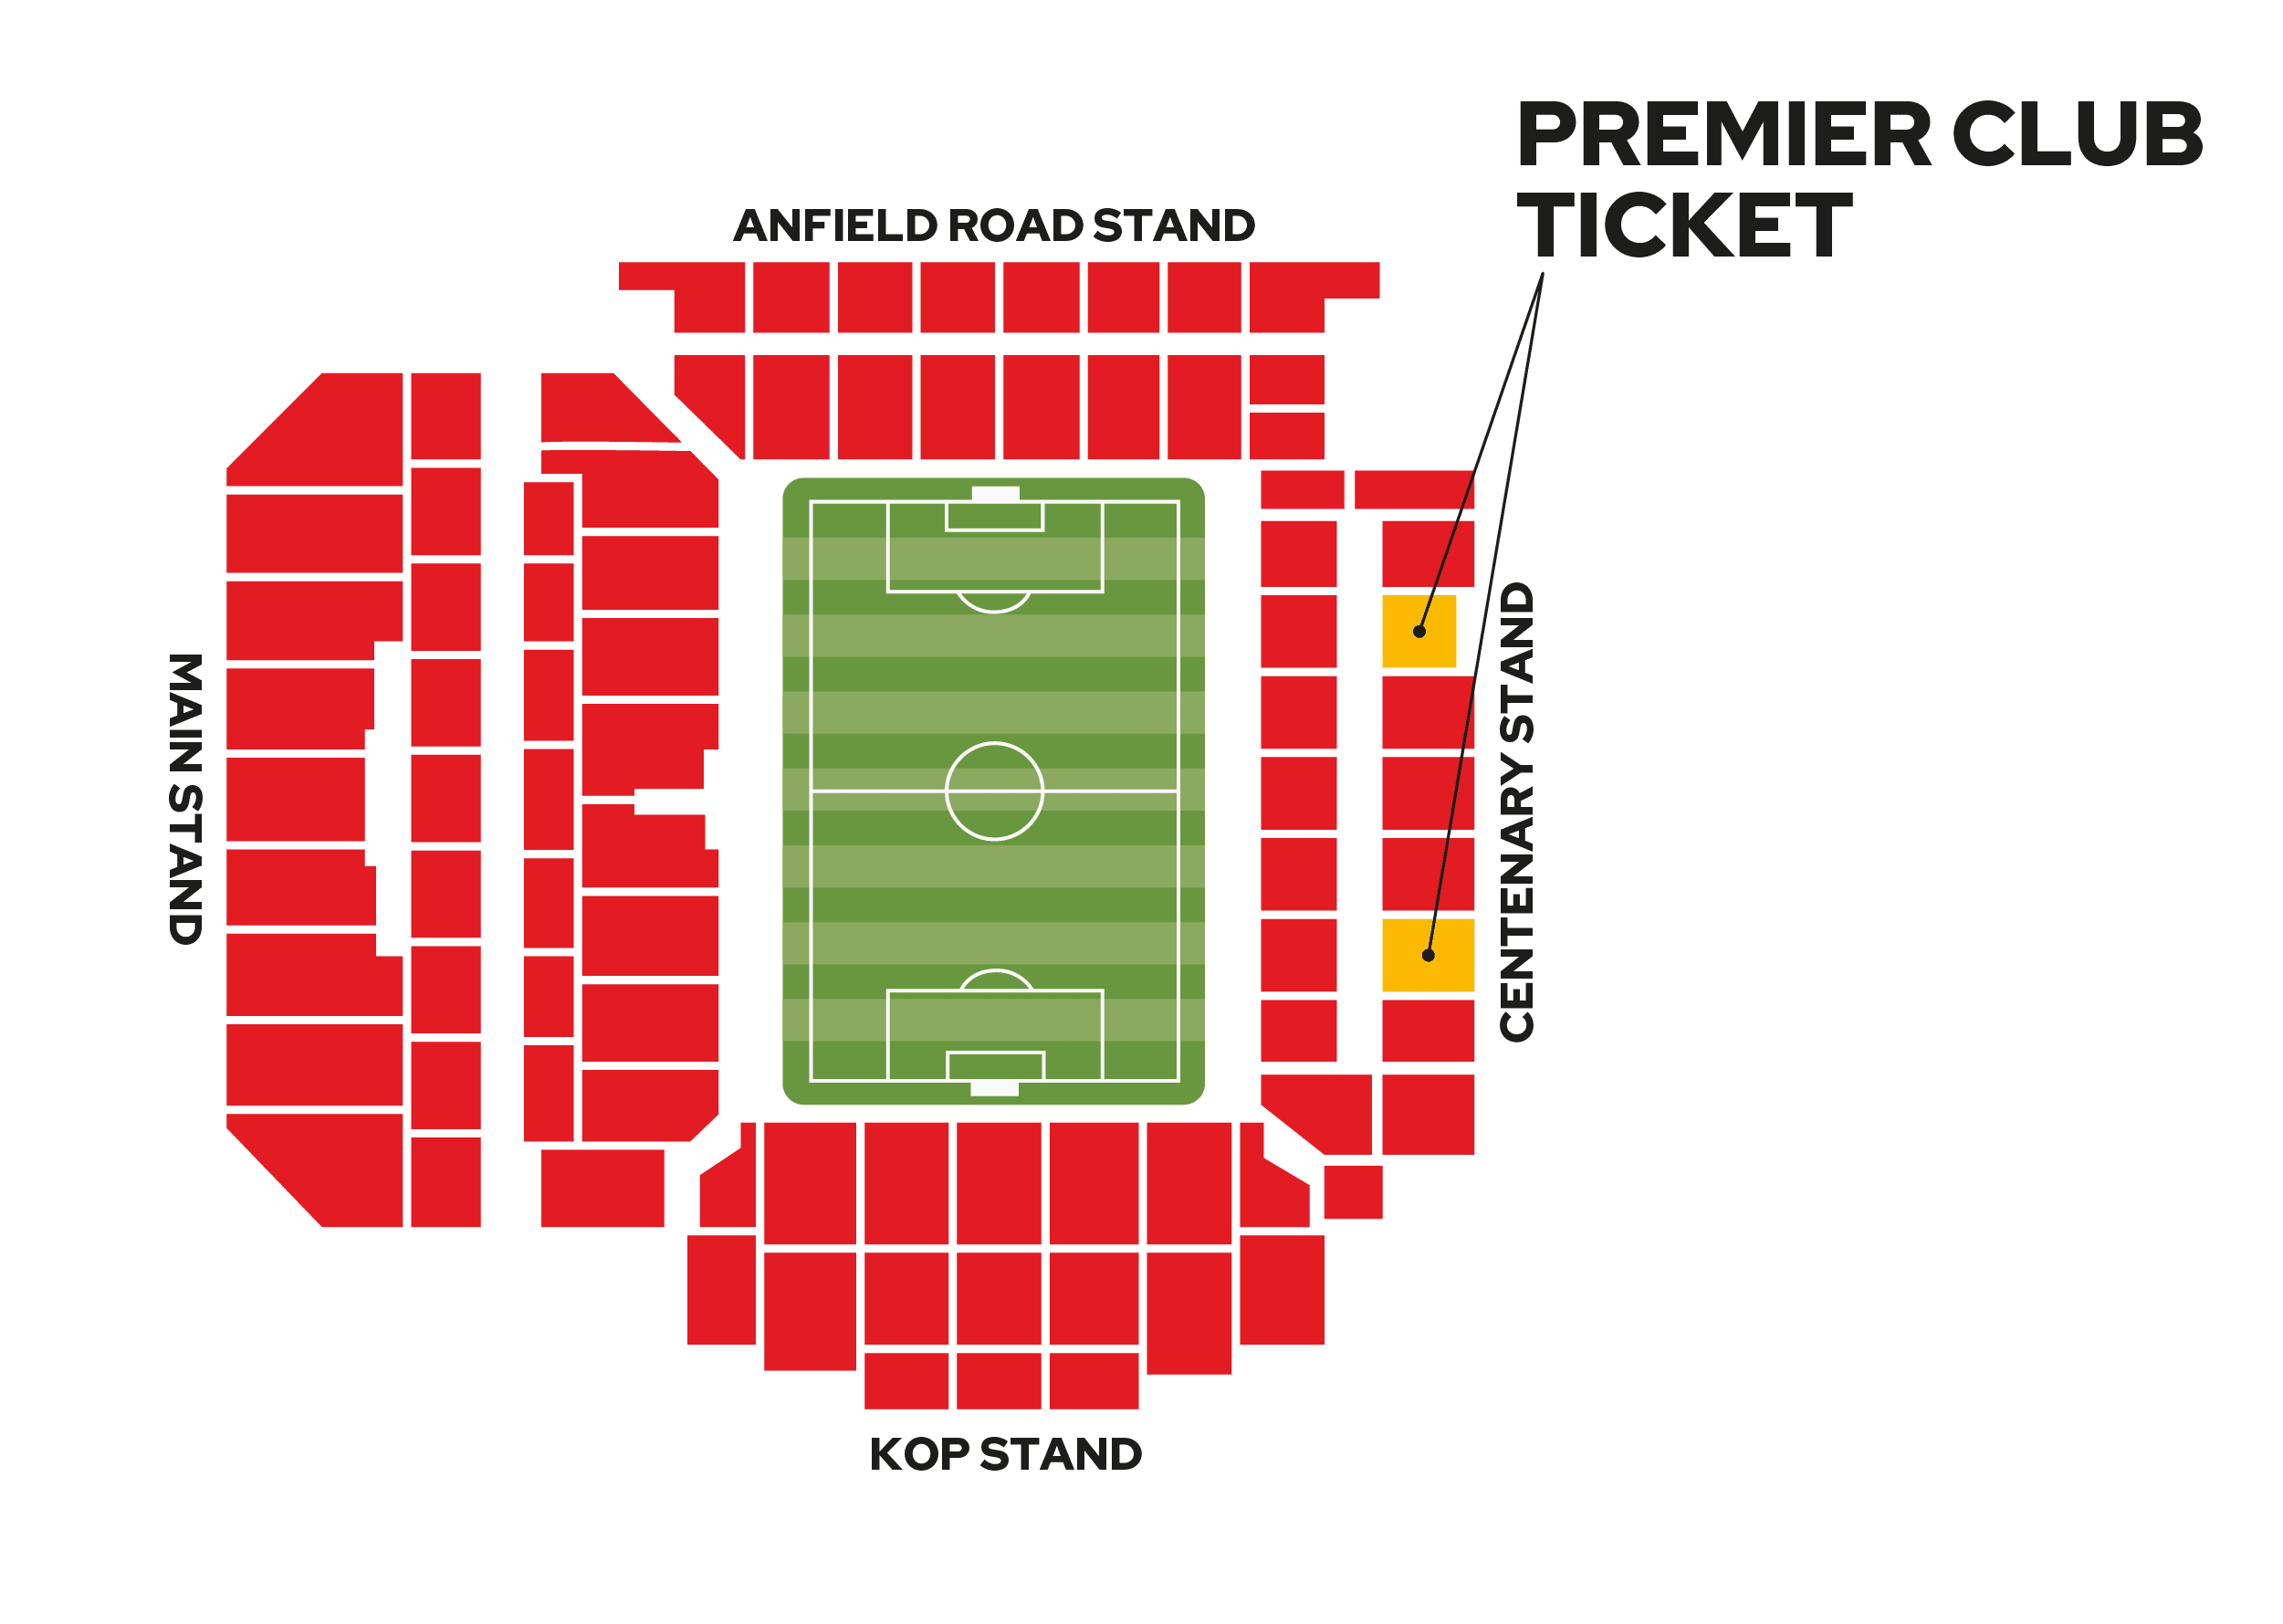 Seating plan for Anfield Stadium premier club seating in the Centenary Stand